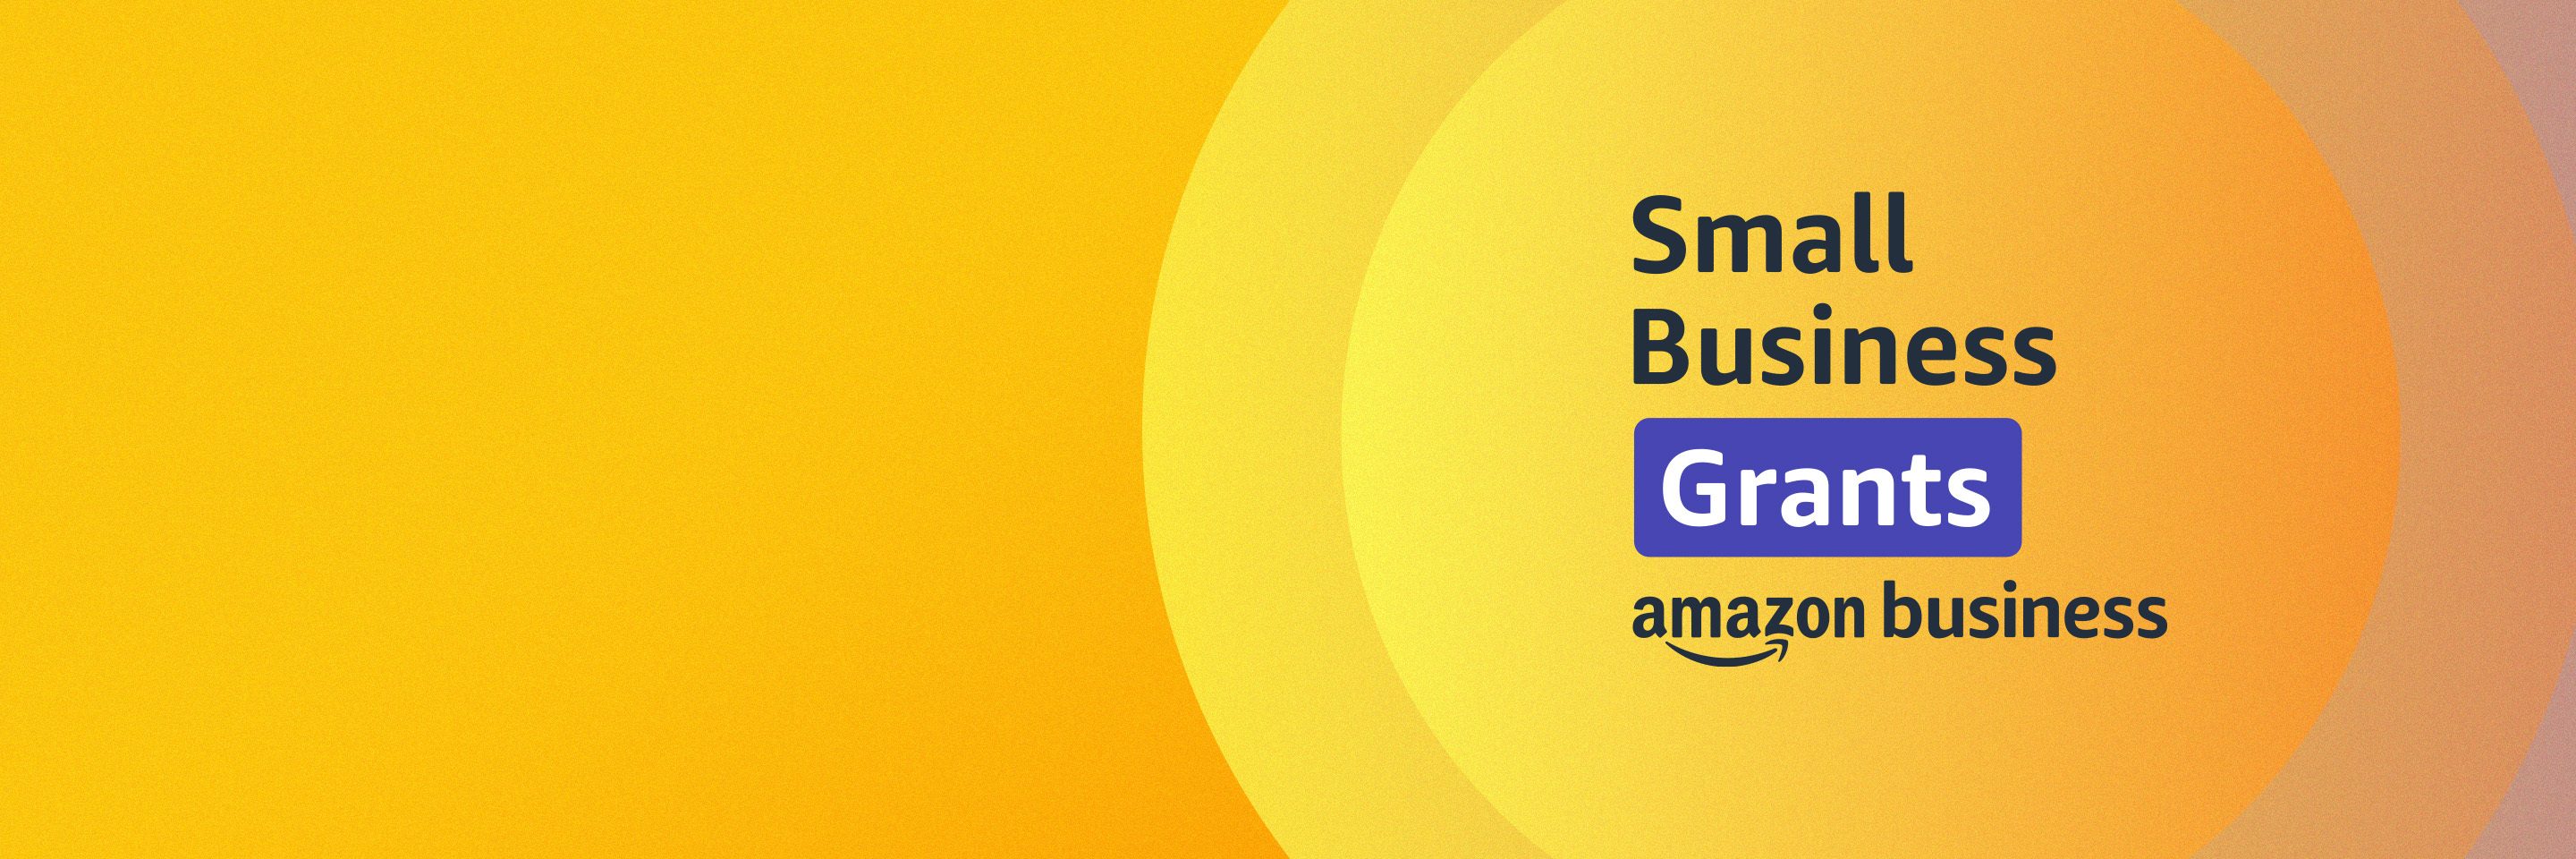 Amazon Business Small Business Grants 